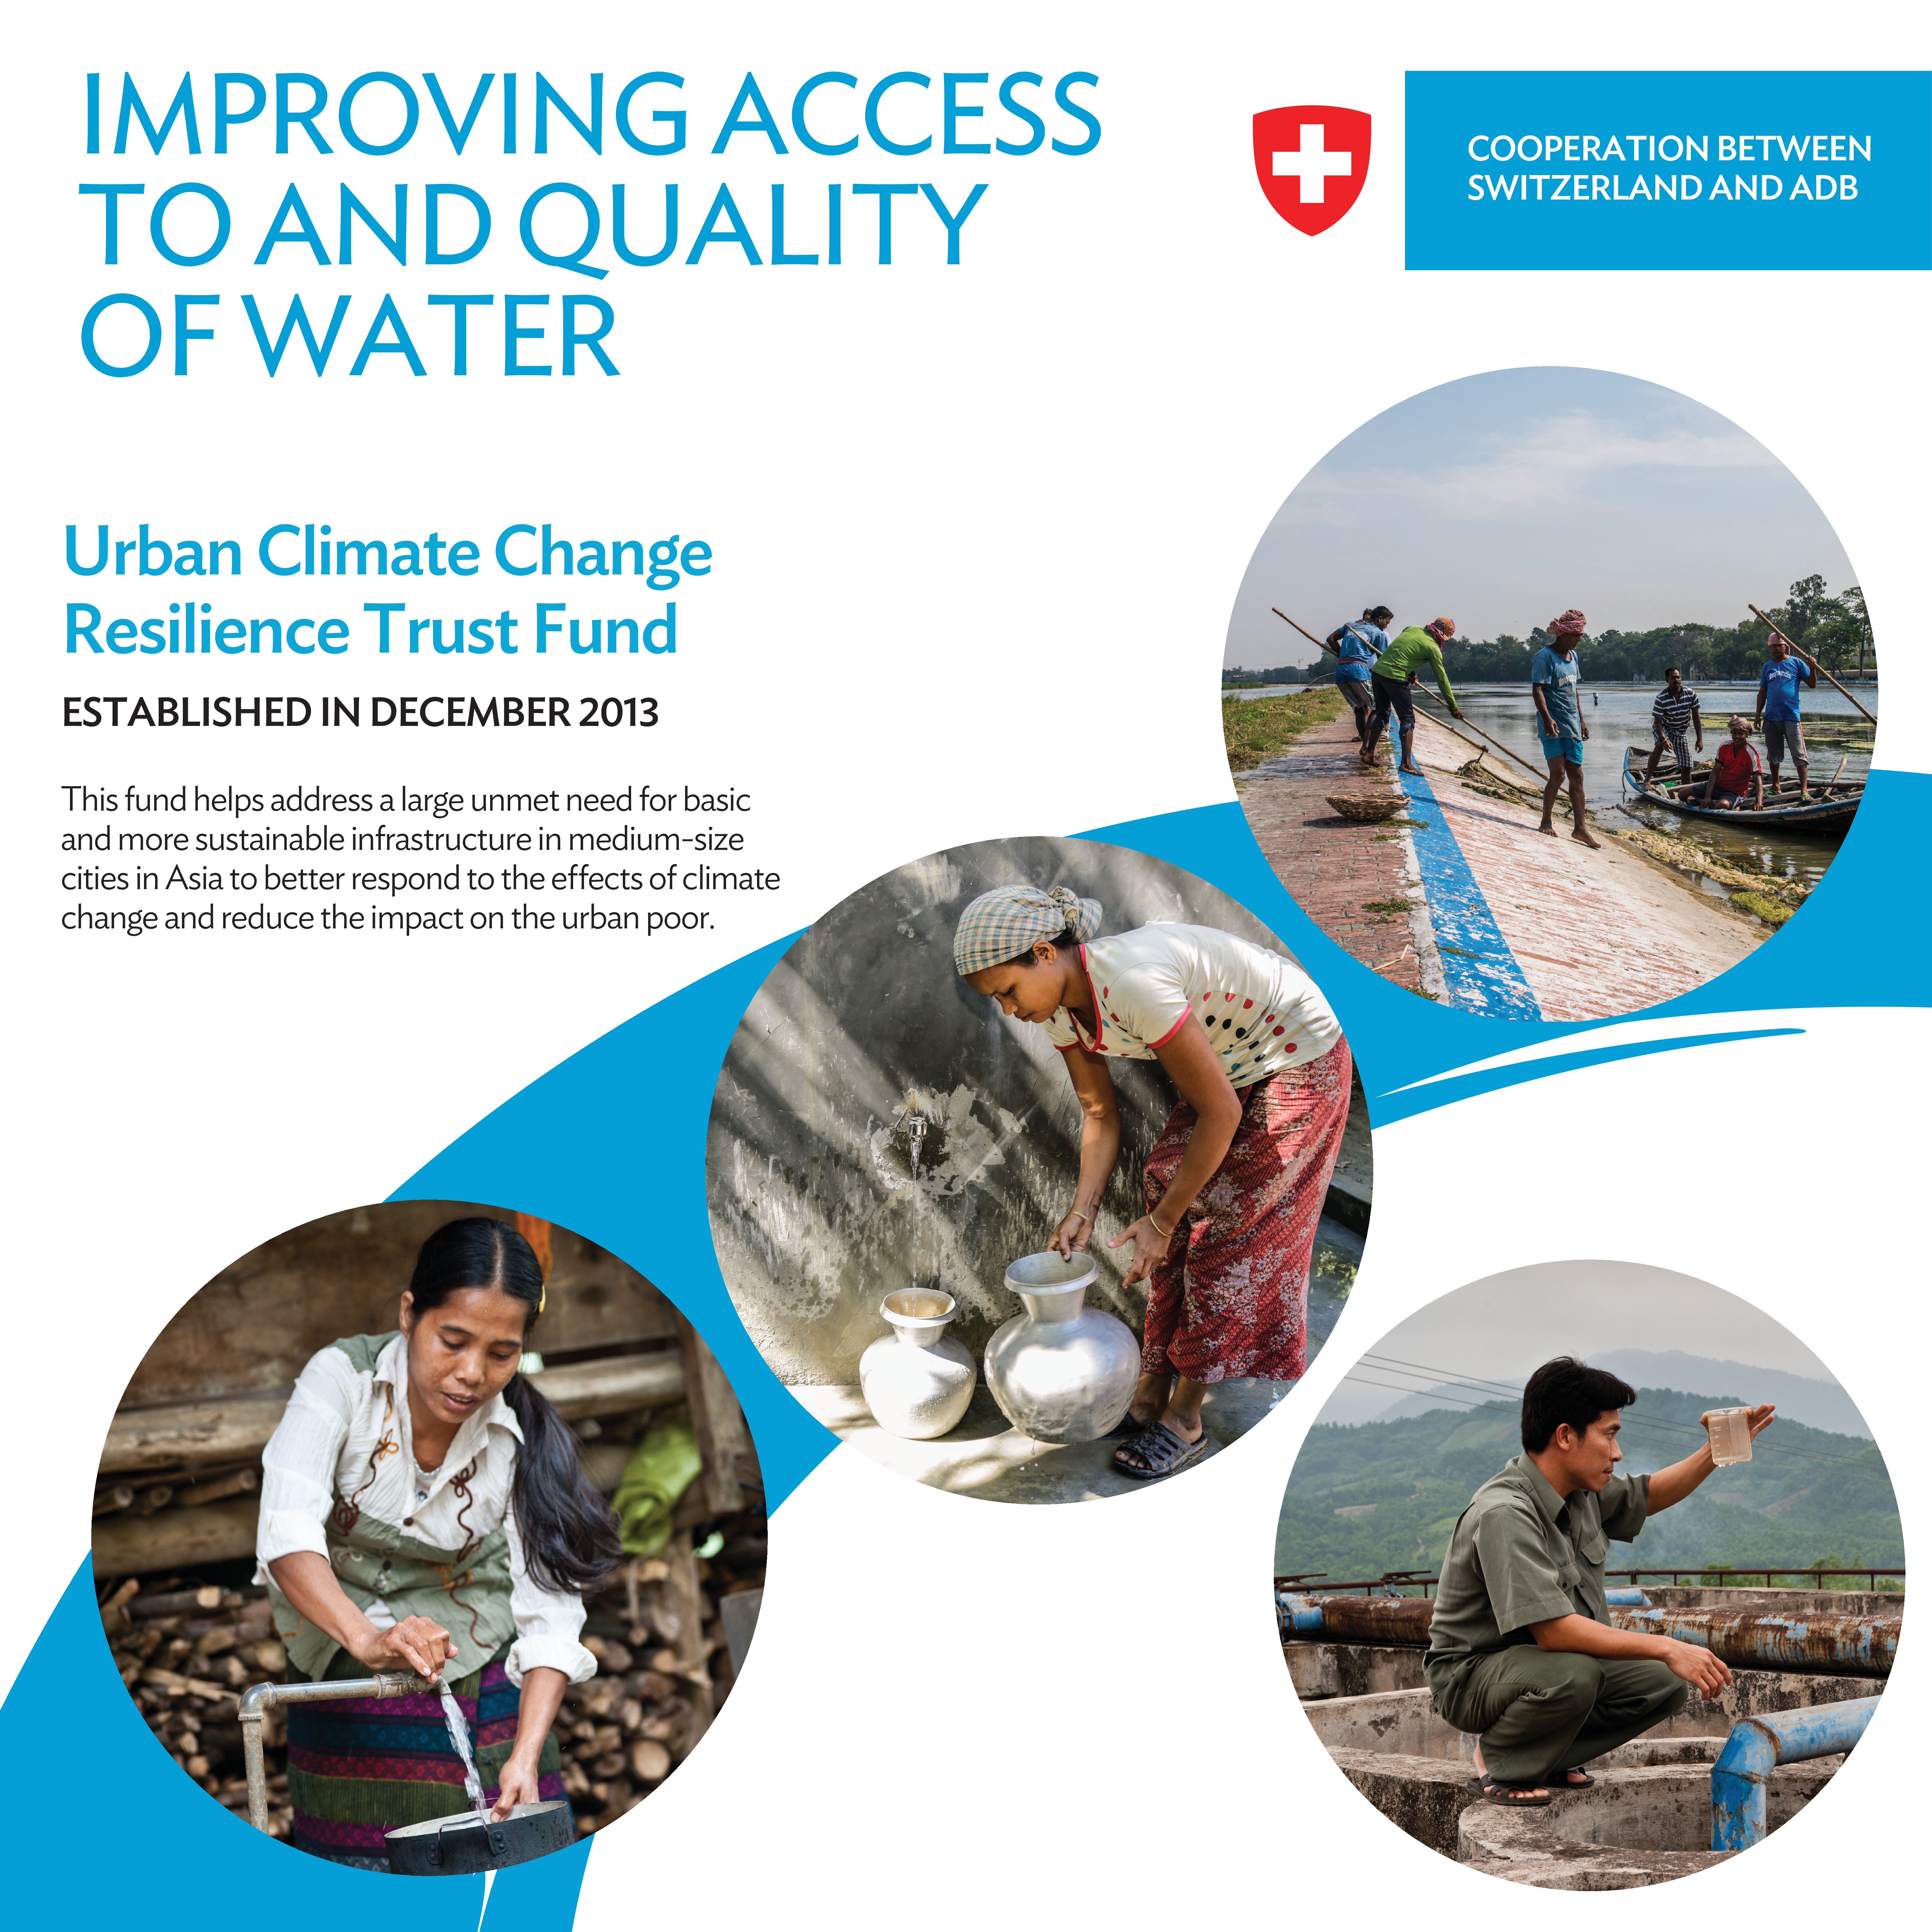 Urban Climate Change Resilience Trust Fund, December 2013